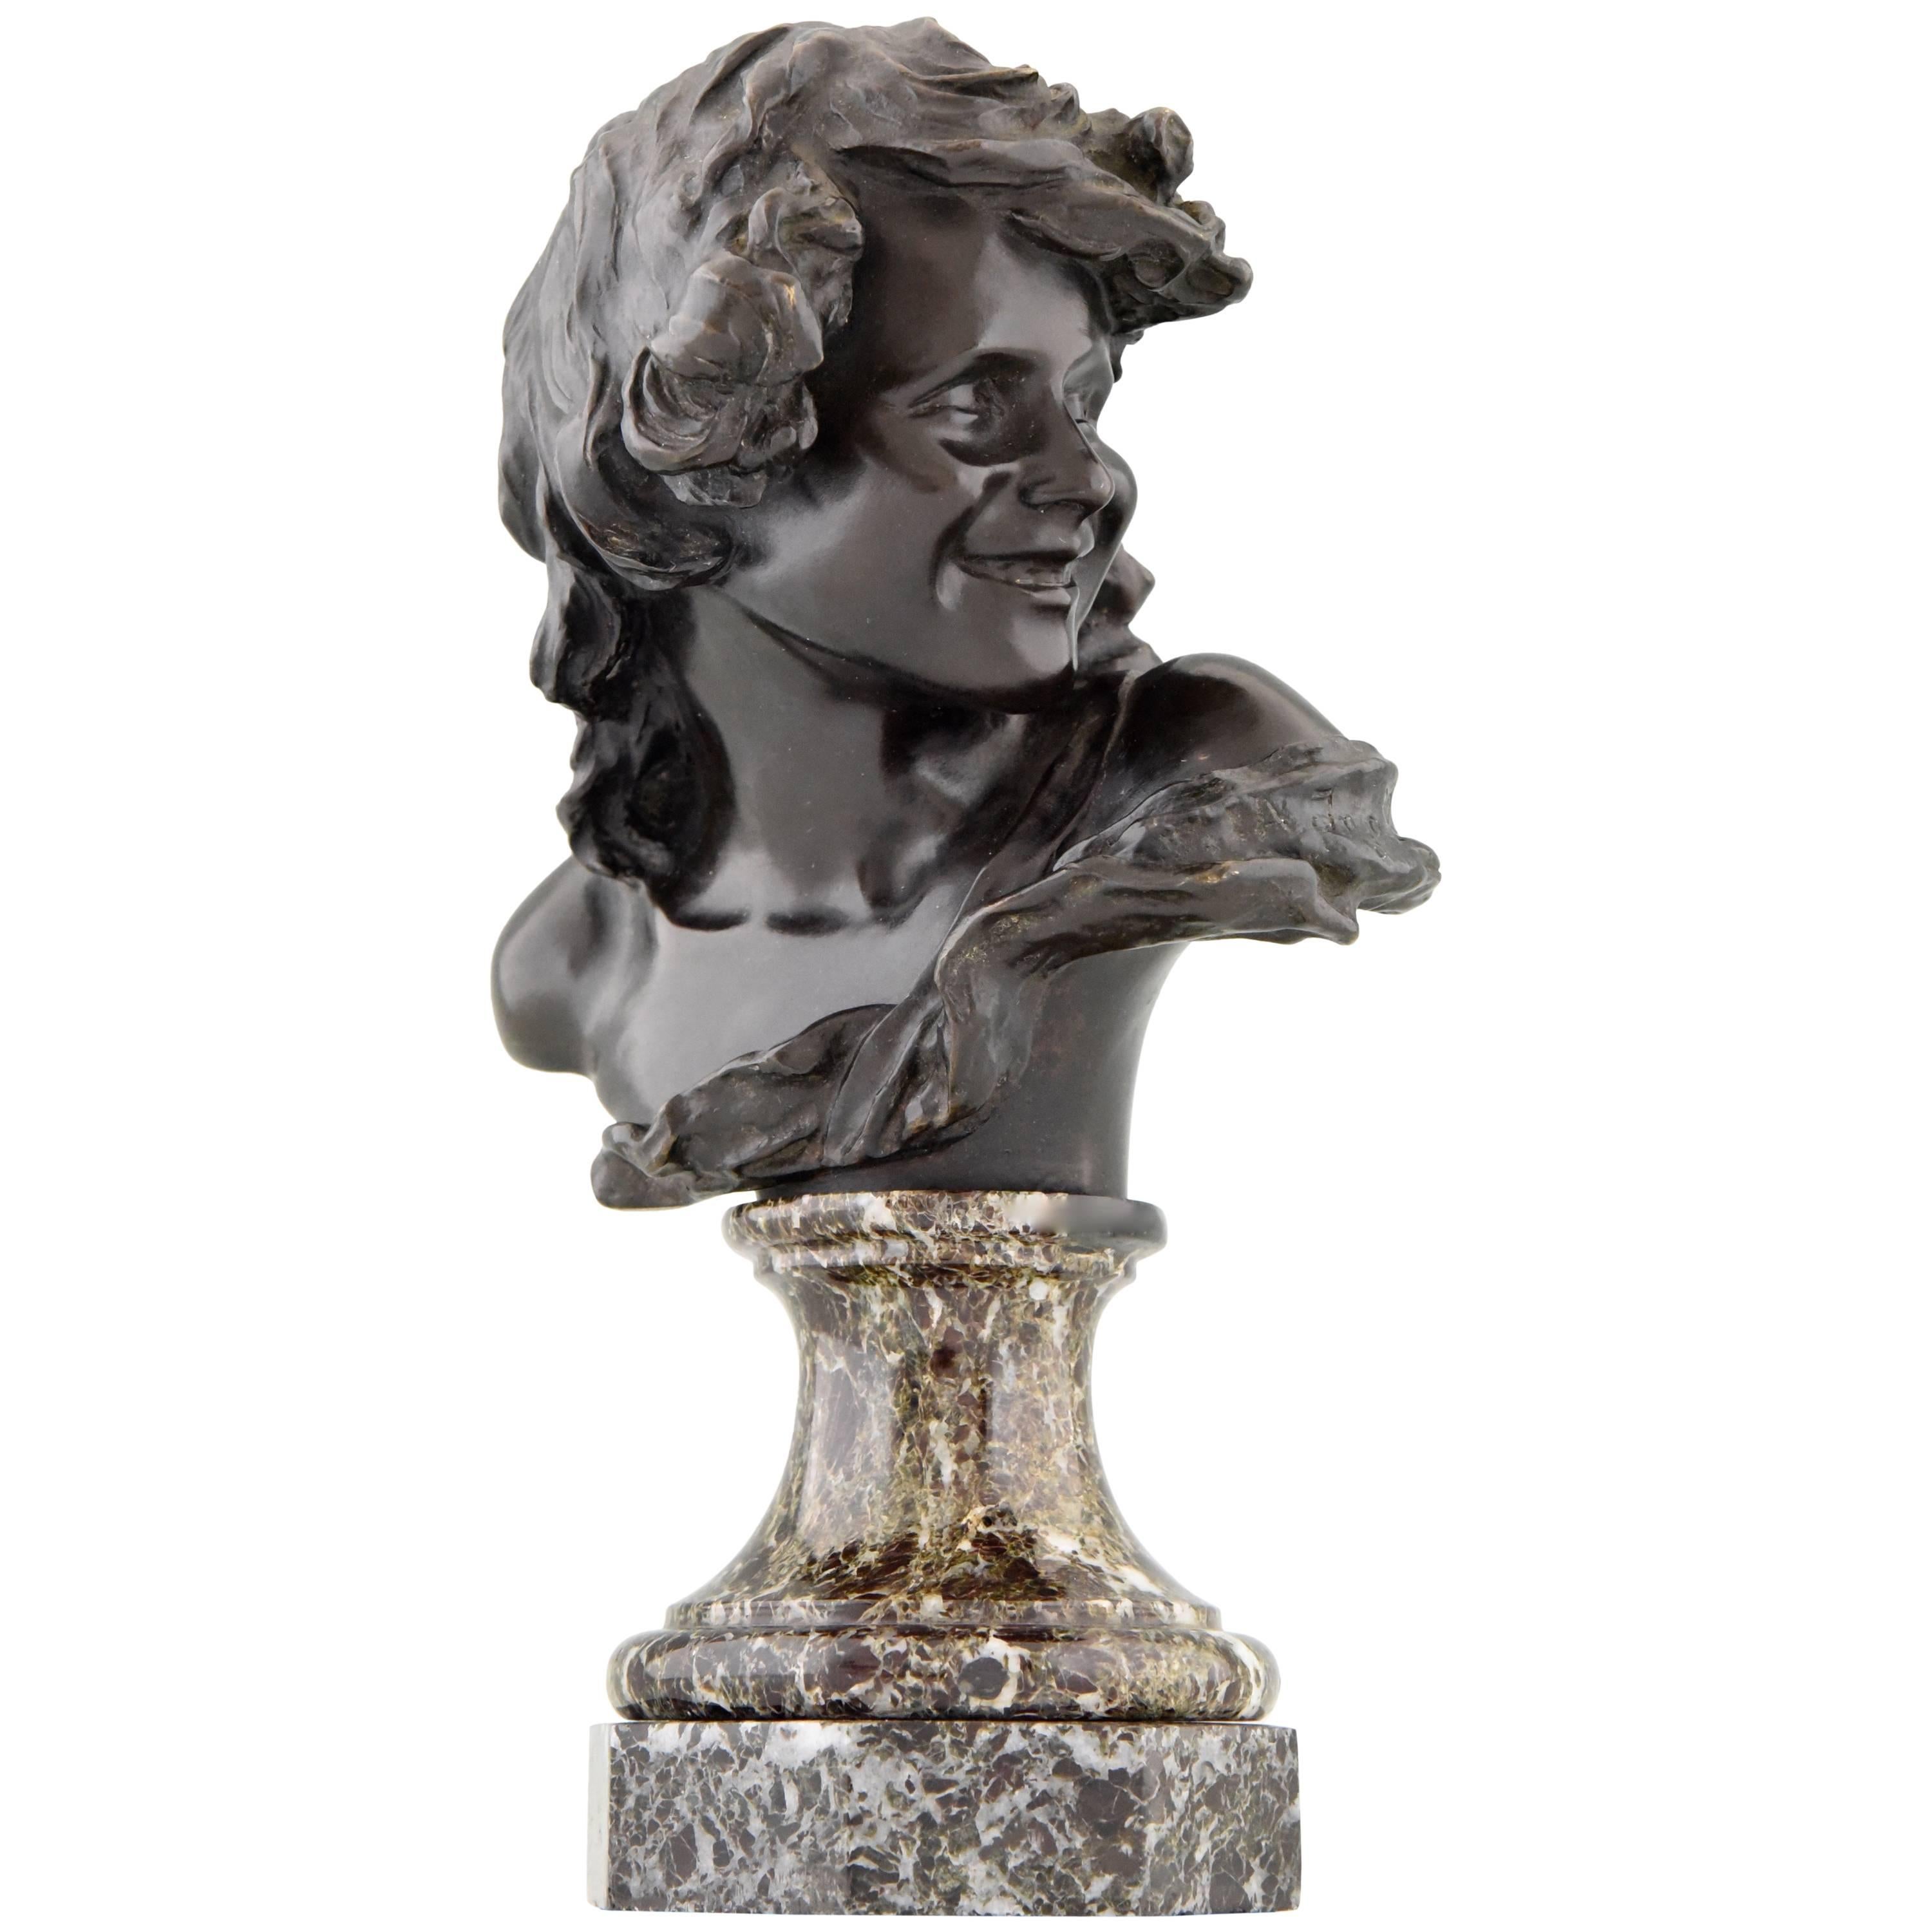 French Antique Bronze Bust of a Smiling Child by Injalbert, 1900